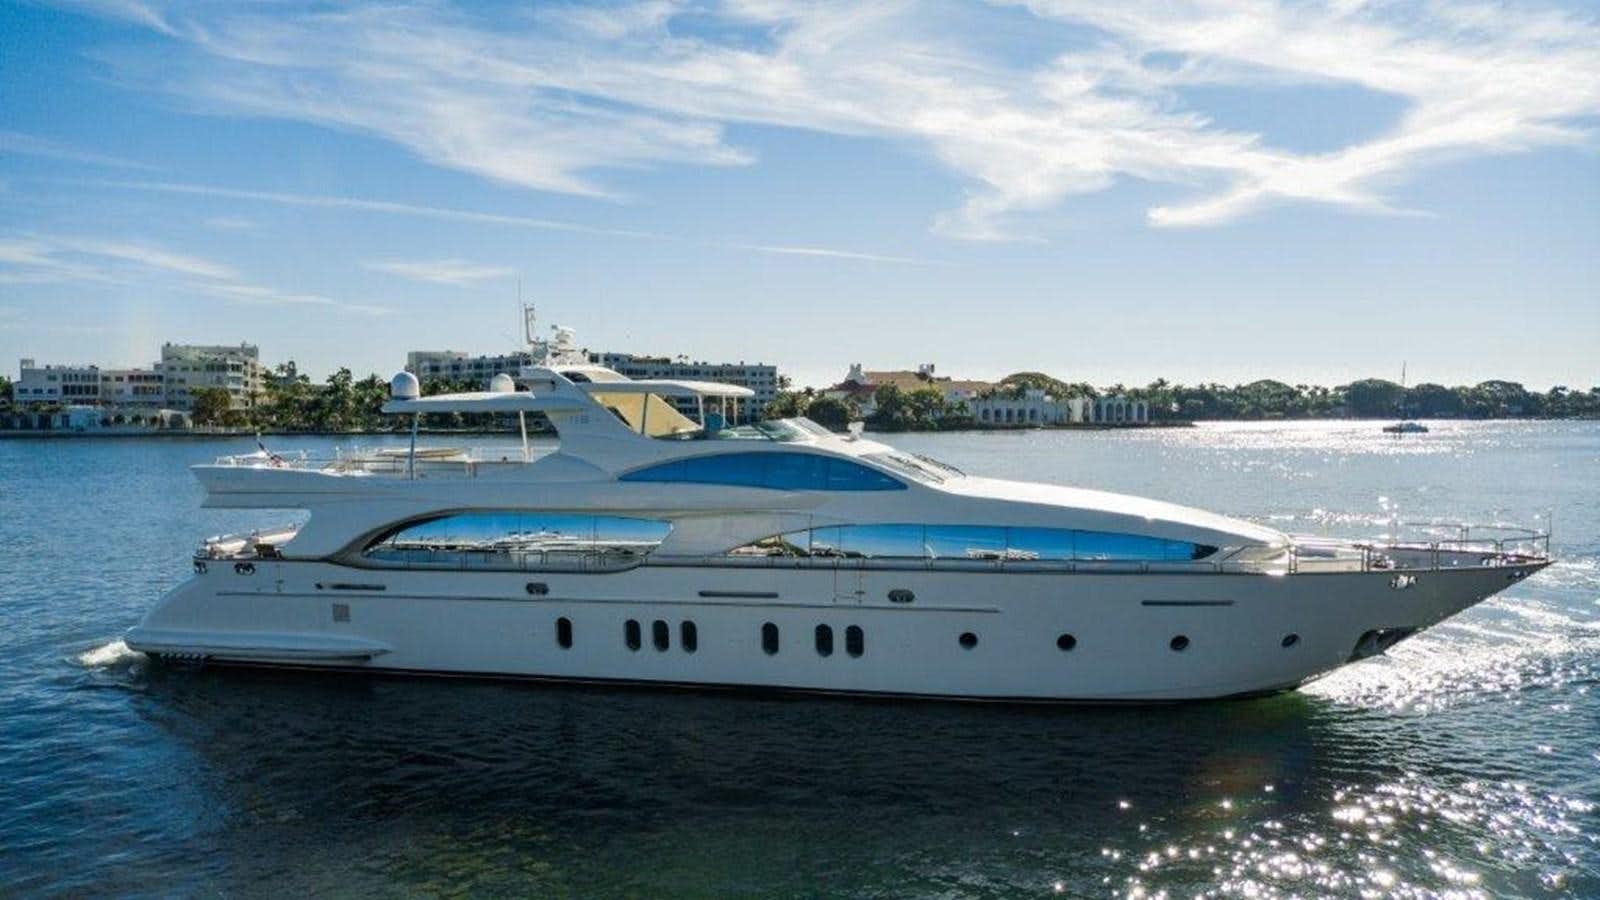 Watch Video for NYHAVEN Yacht for Sale